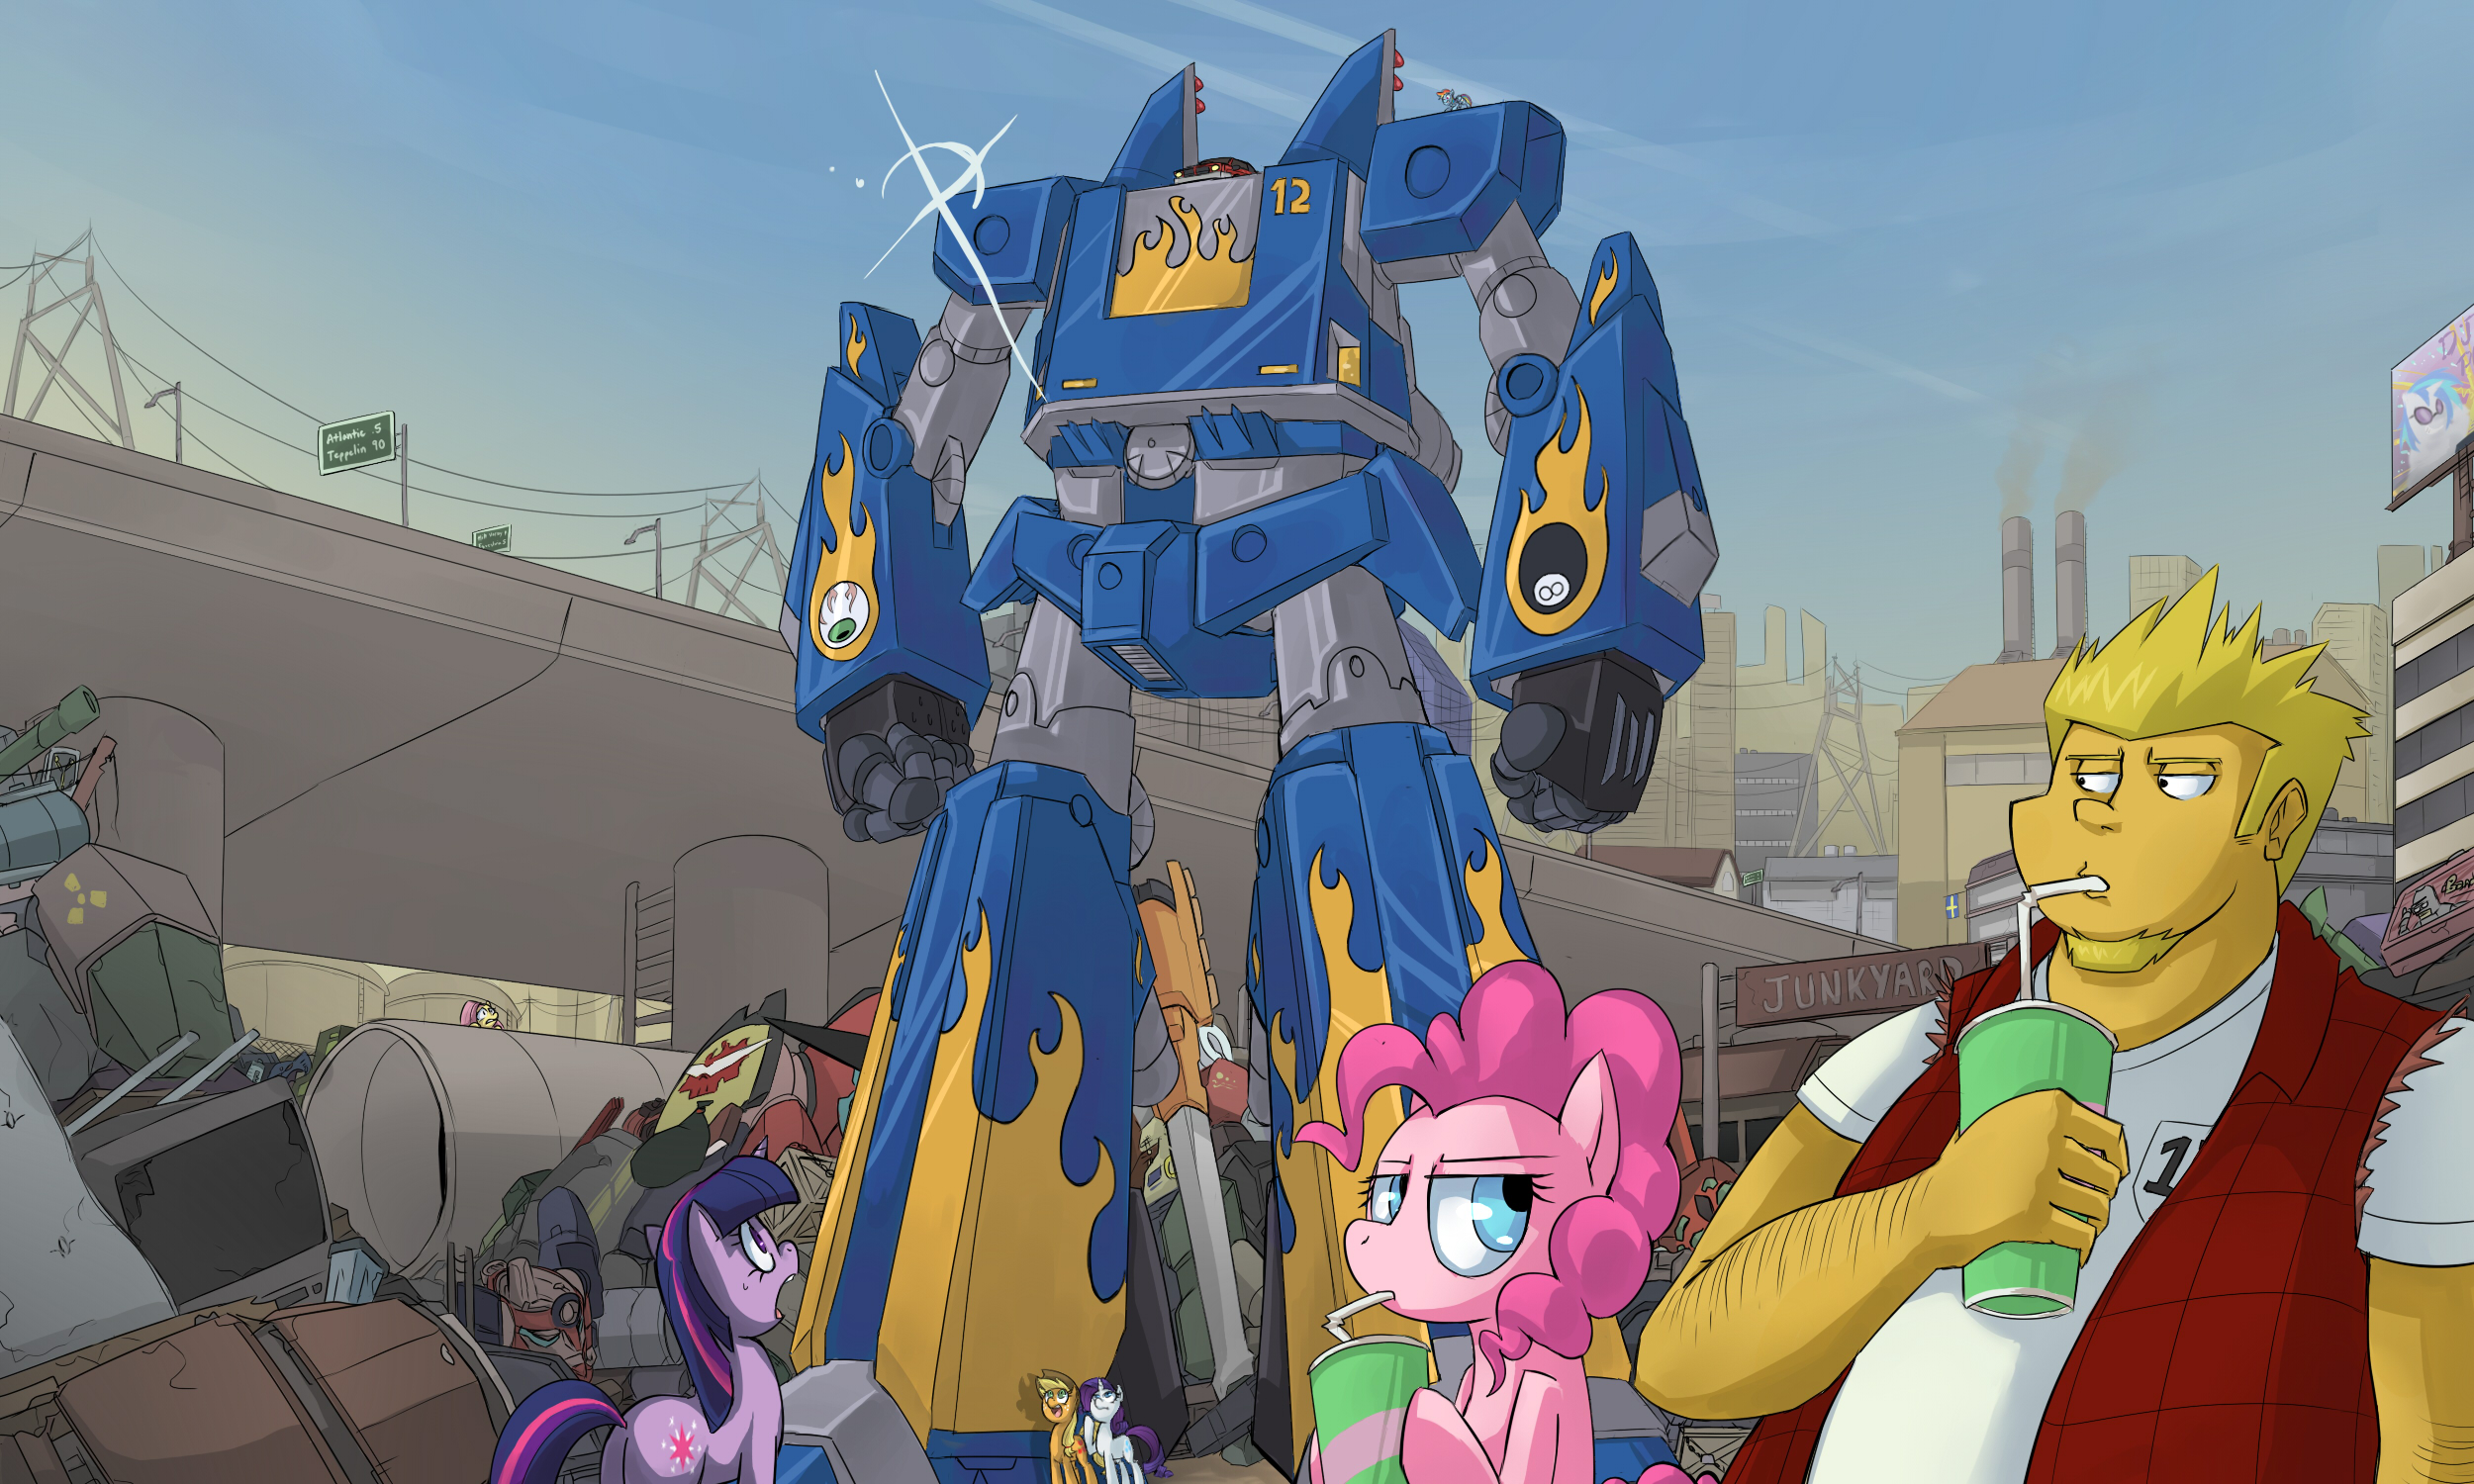 Ponies Dig Giant Robots by UC77